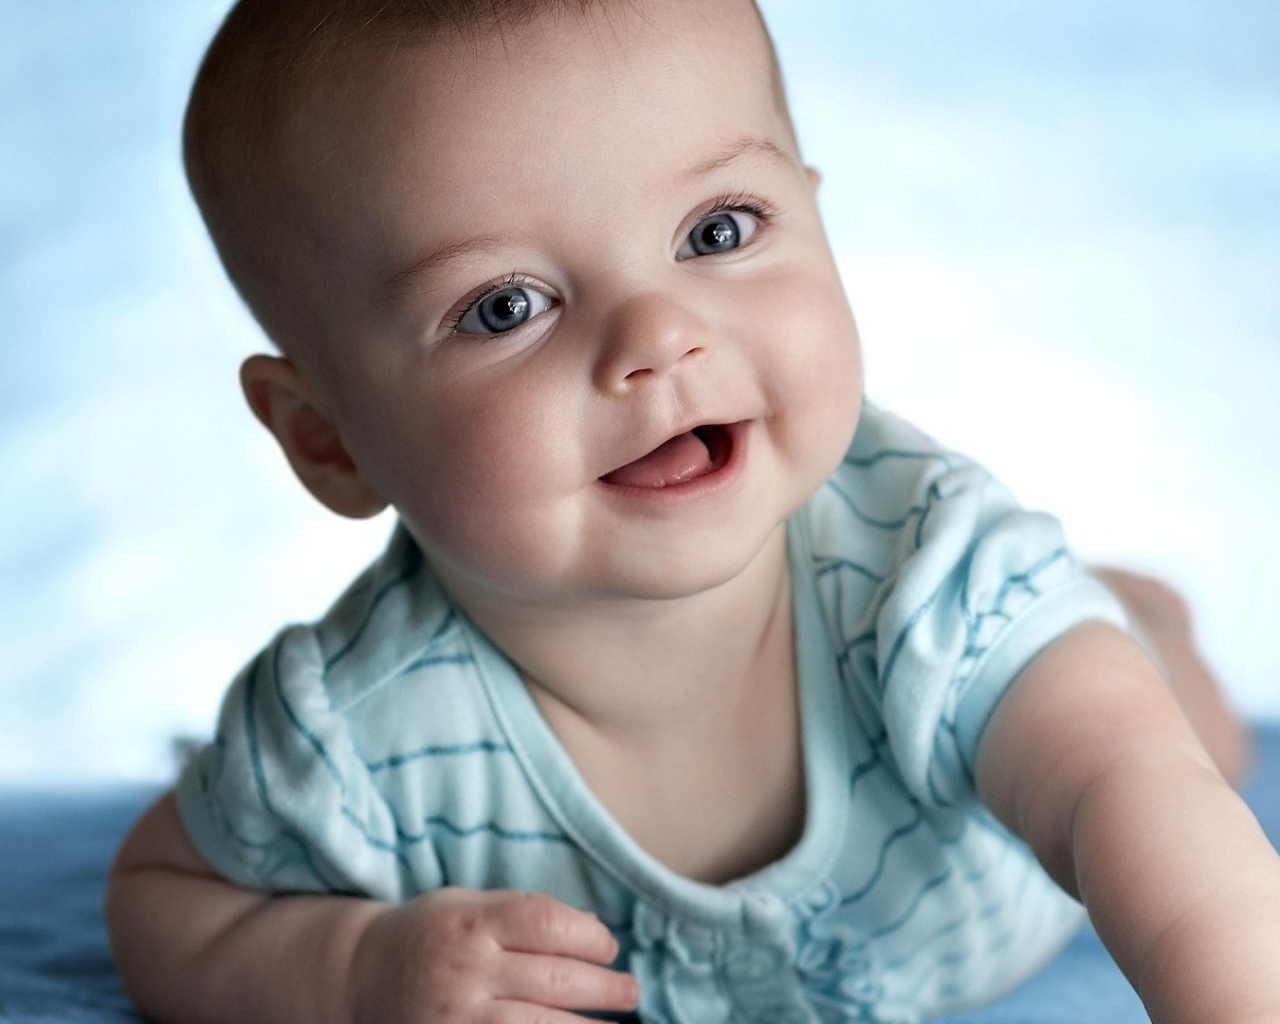 baby_face_happy_smile_44518_1280x1024